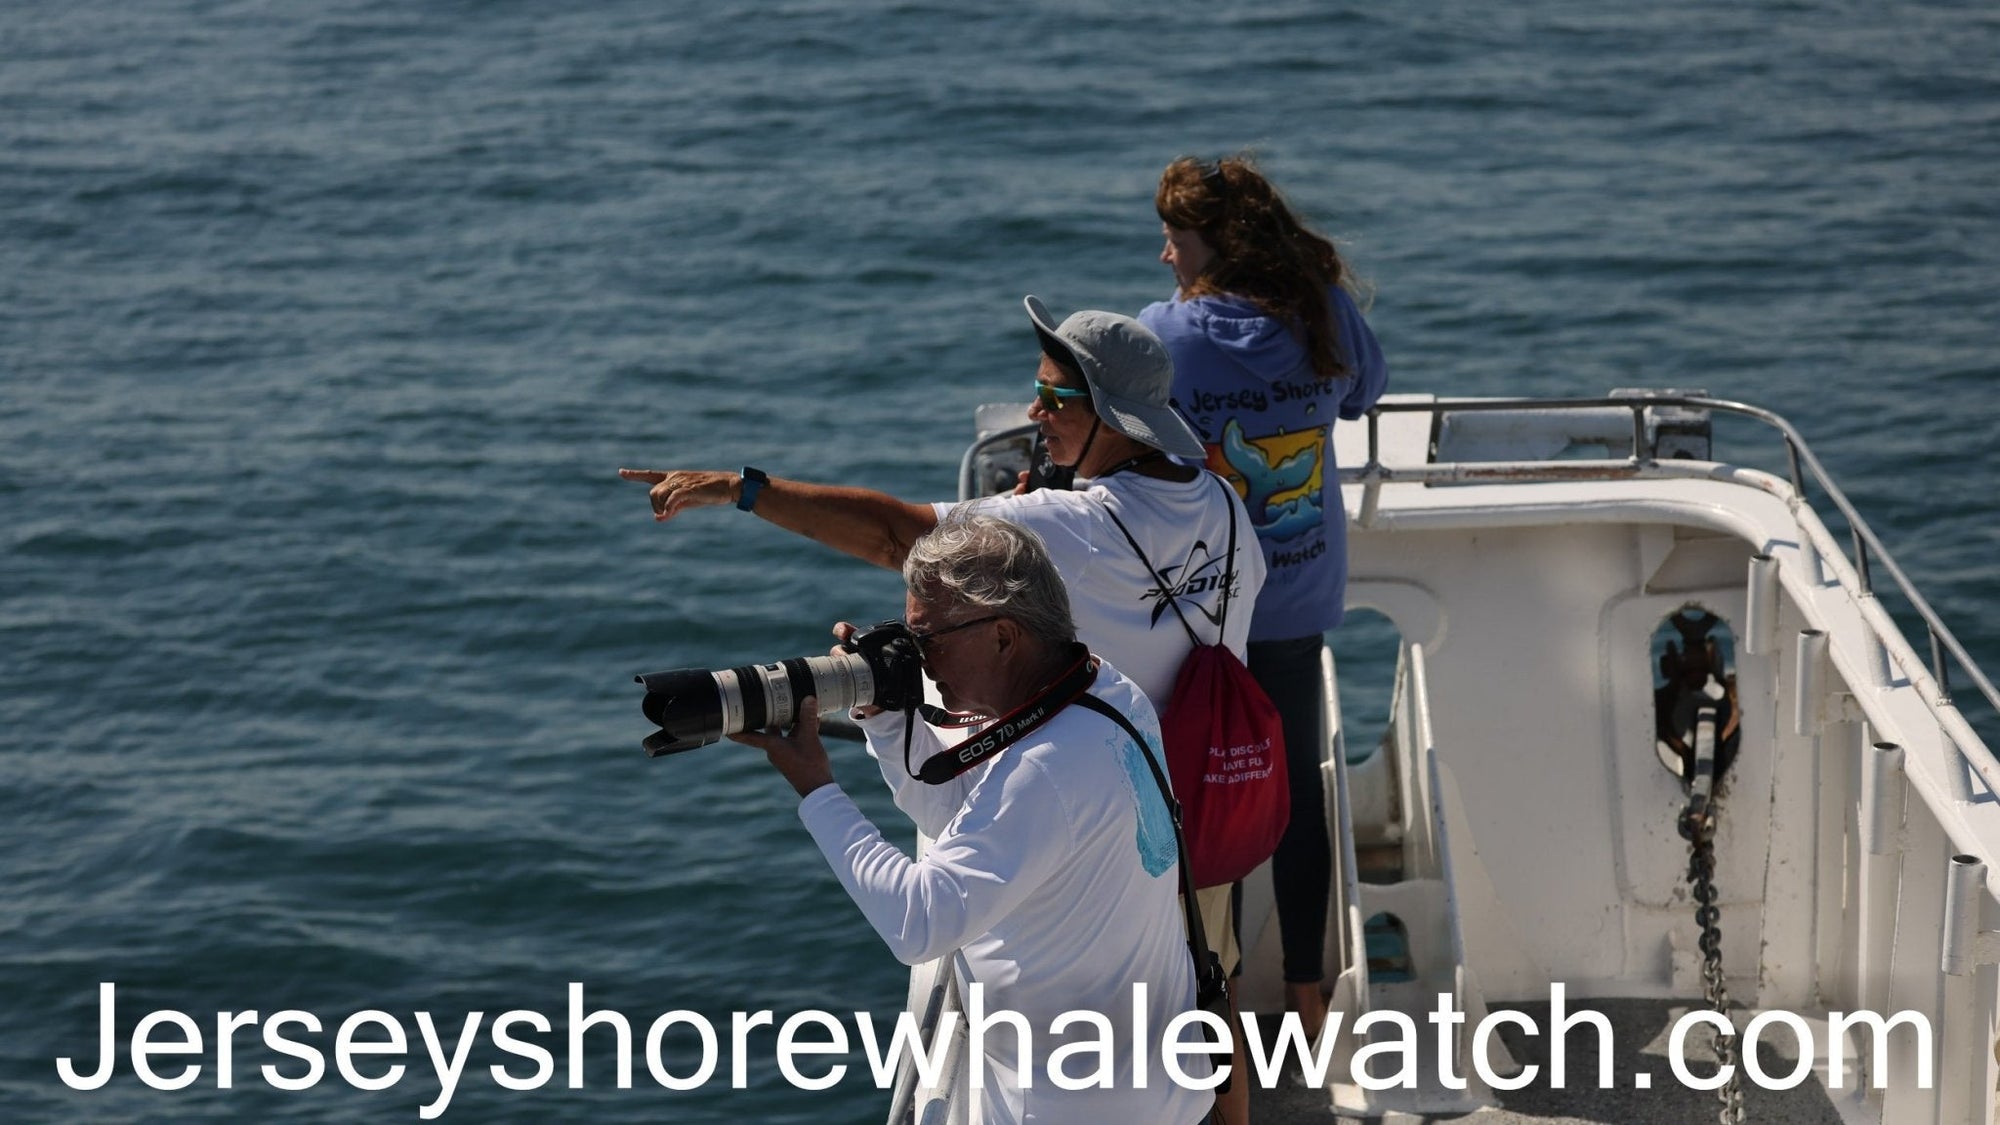 Thursday afternoon whale watching trip photo May 27th